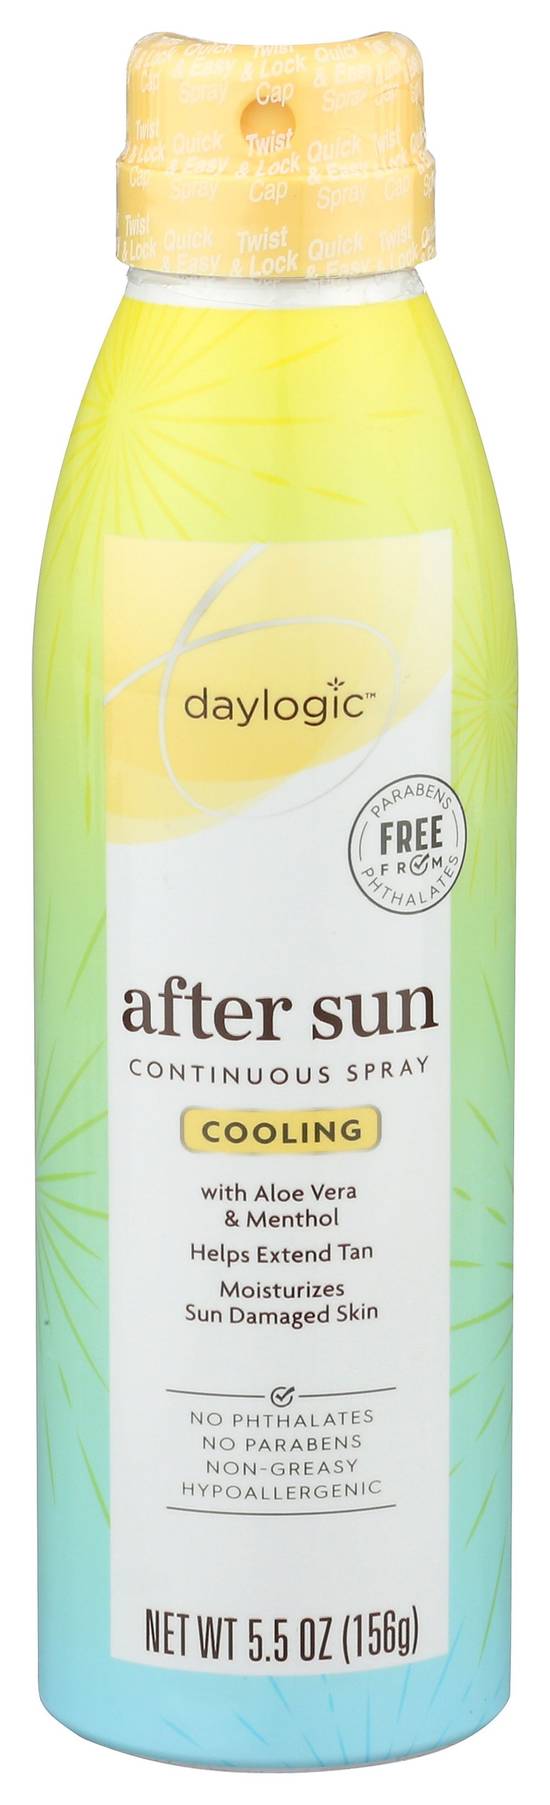 Daylogic After Sun Continuous Spray Cooling - 5.5 oz